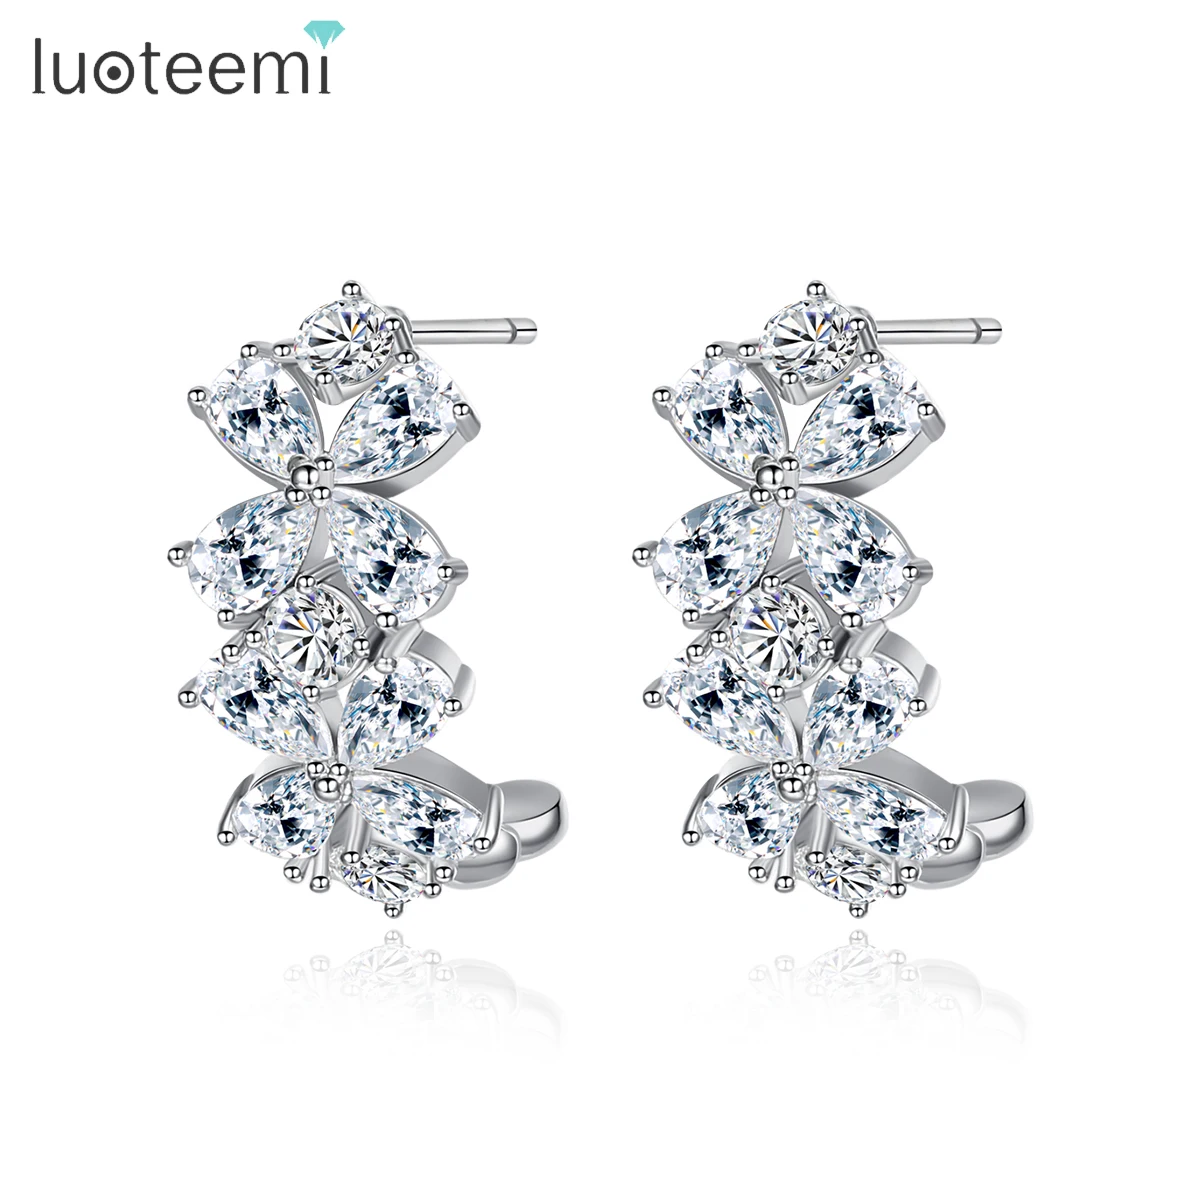 

LUOTEEMI Unique Design Semi-annular Flower Stud Earrings for Women Party Wedding Shining CZ Fashion Jewelry Double Color Brincos